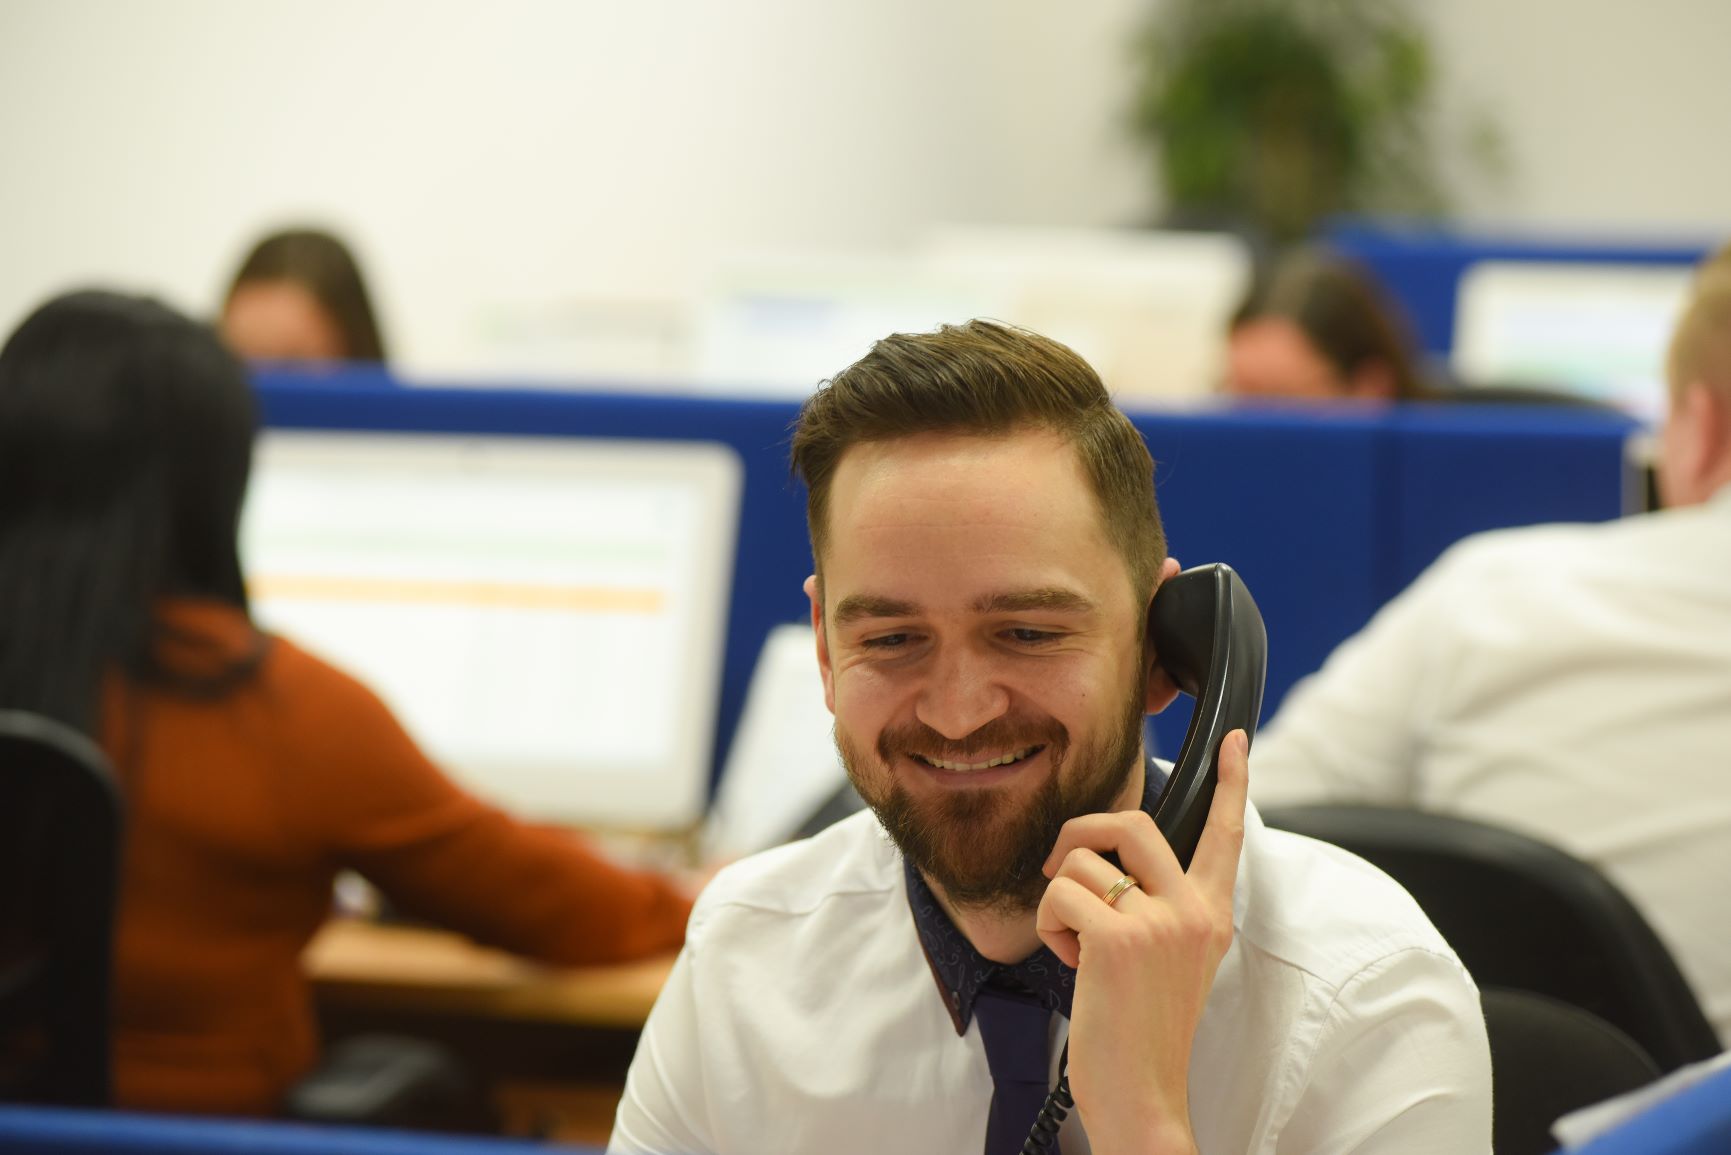 The Advantages of Using Telemarketing in Your B2B Marketing Strategy